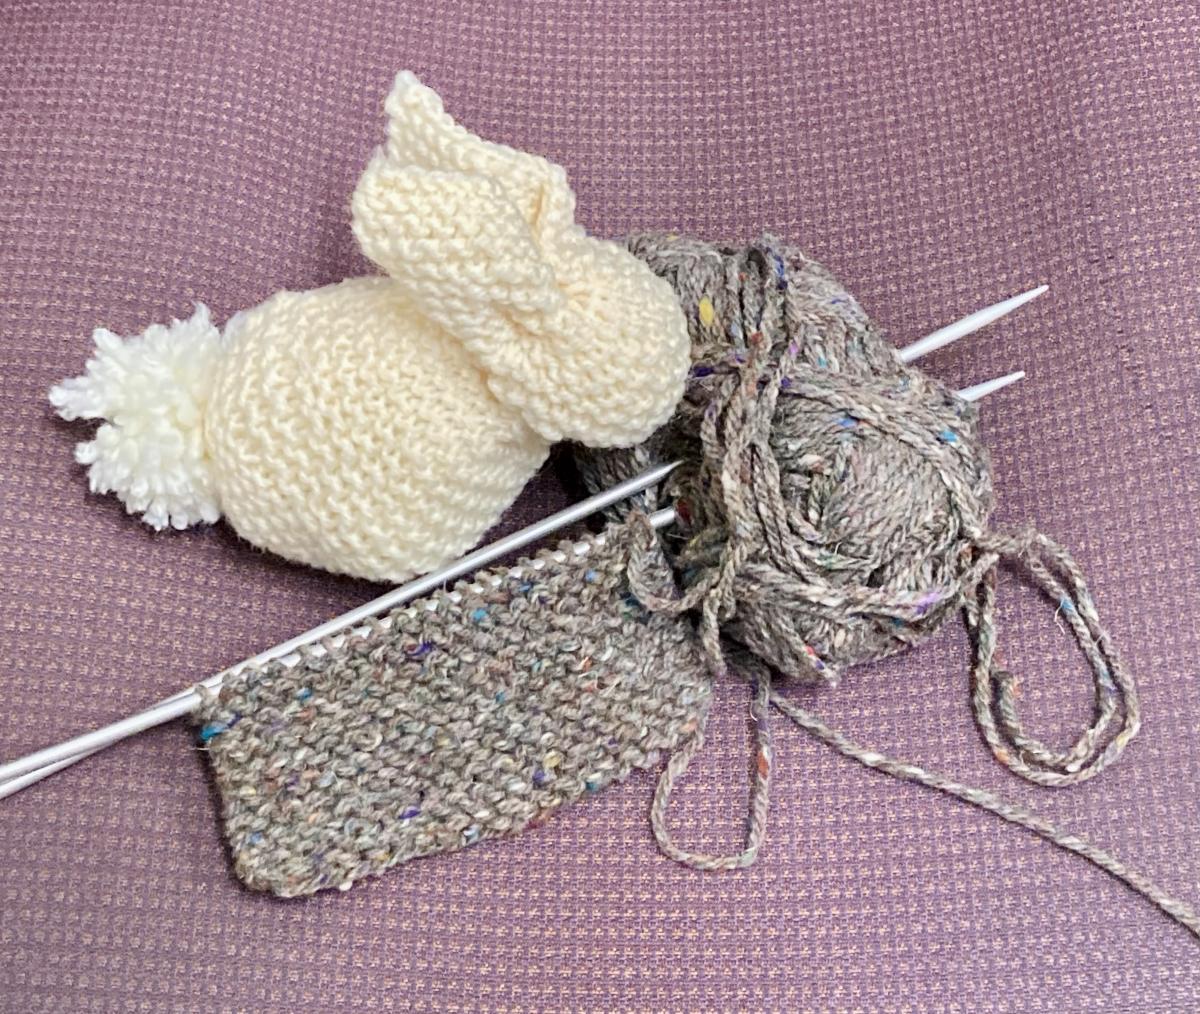 A cream colored knit rabbit next to a pair of knitting needles in the middle of a project stabbed through a ball of yarn